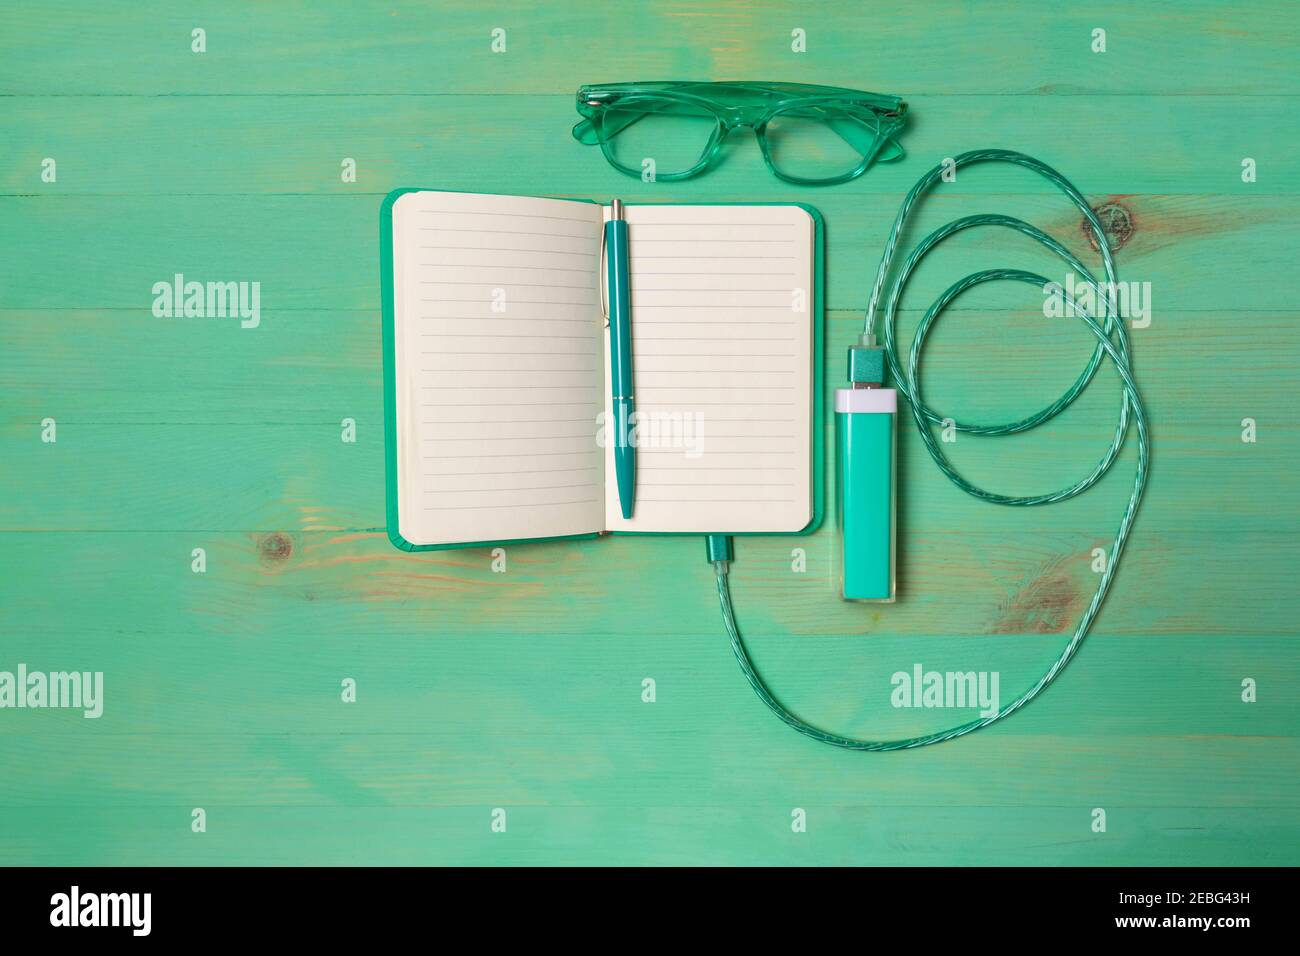 Paper notebook charging by power bank, pen and eyeglasses on wooden background. Joke imitating charging. Mockup in turquoise color. Stock Photo